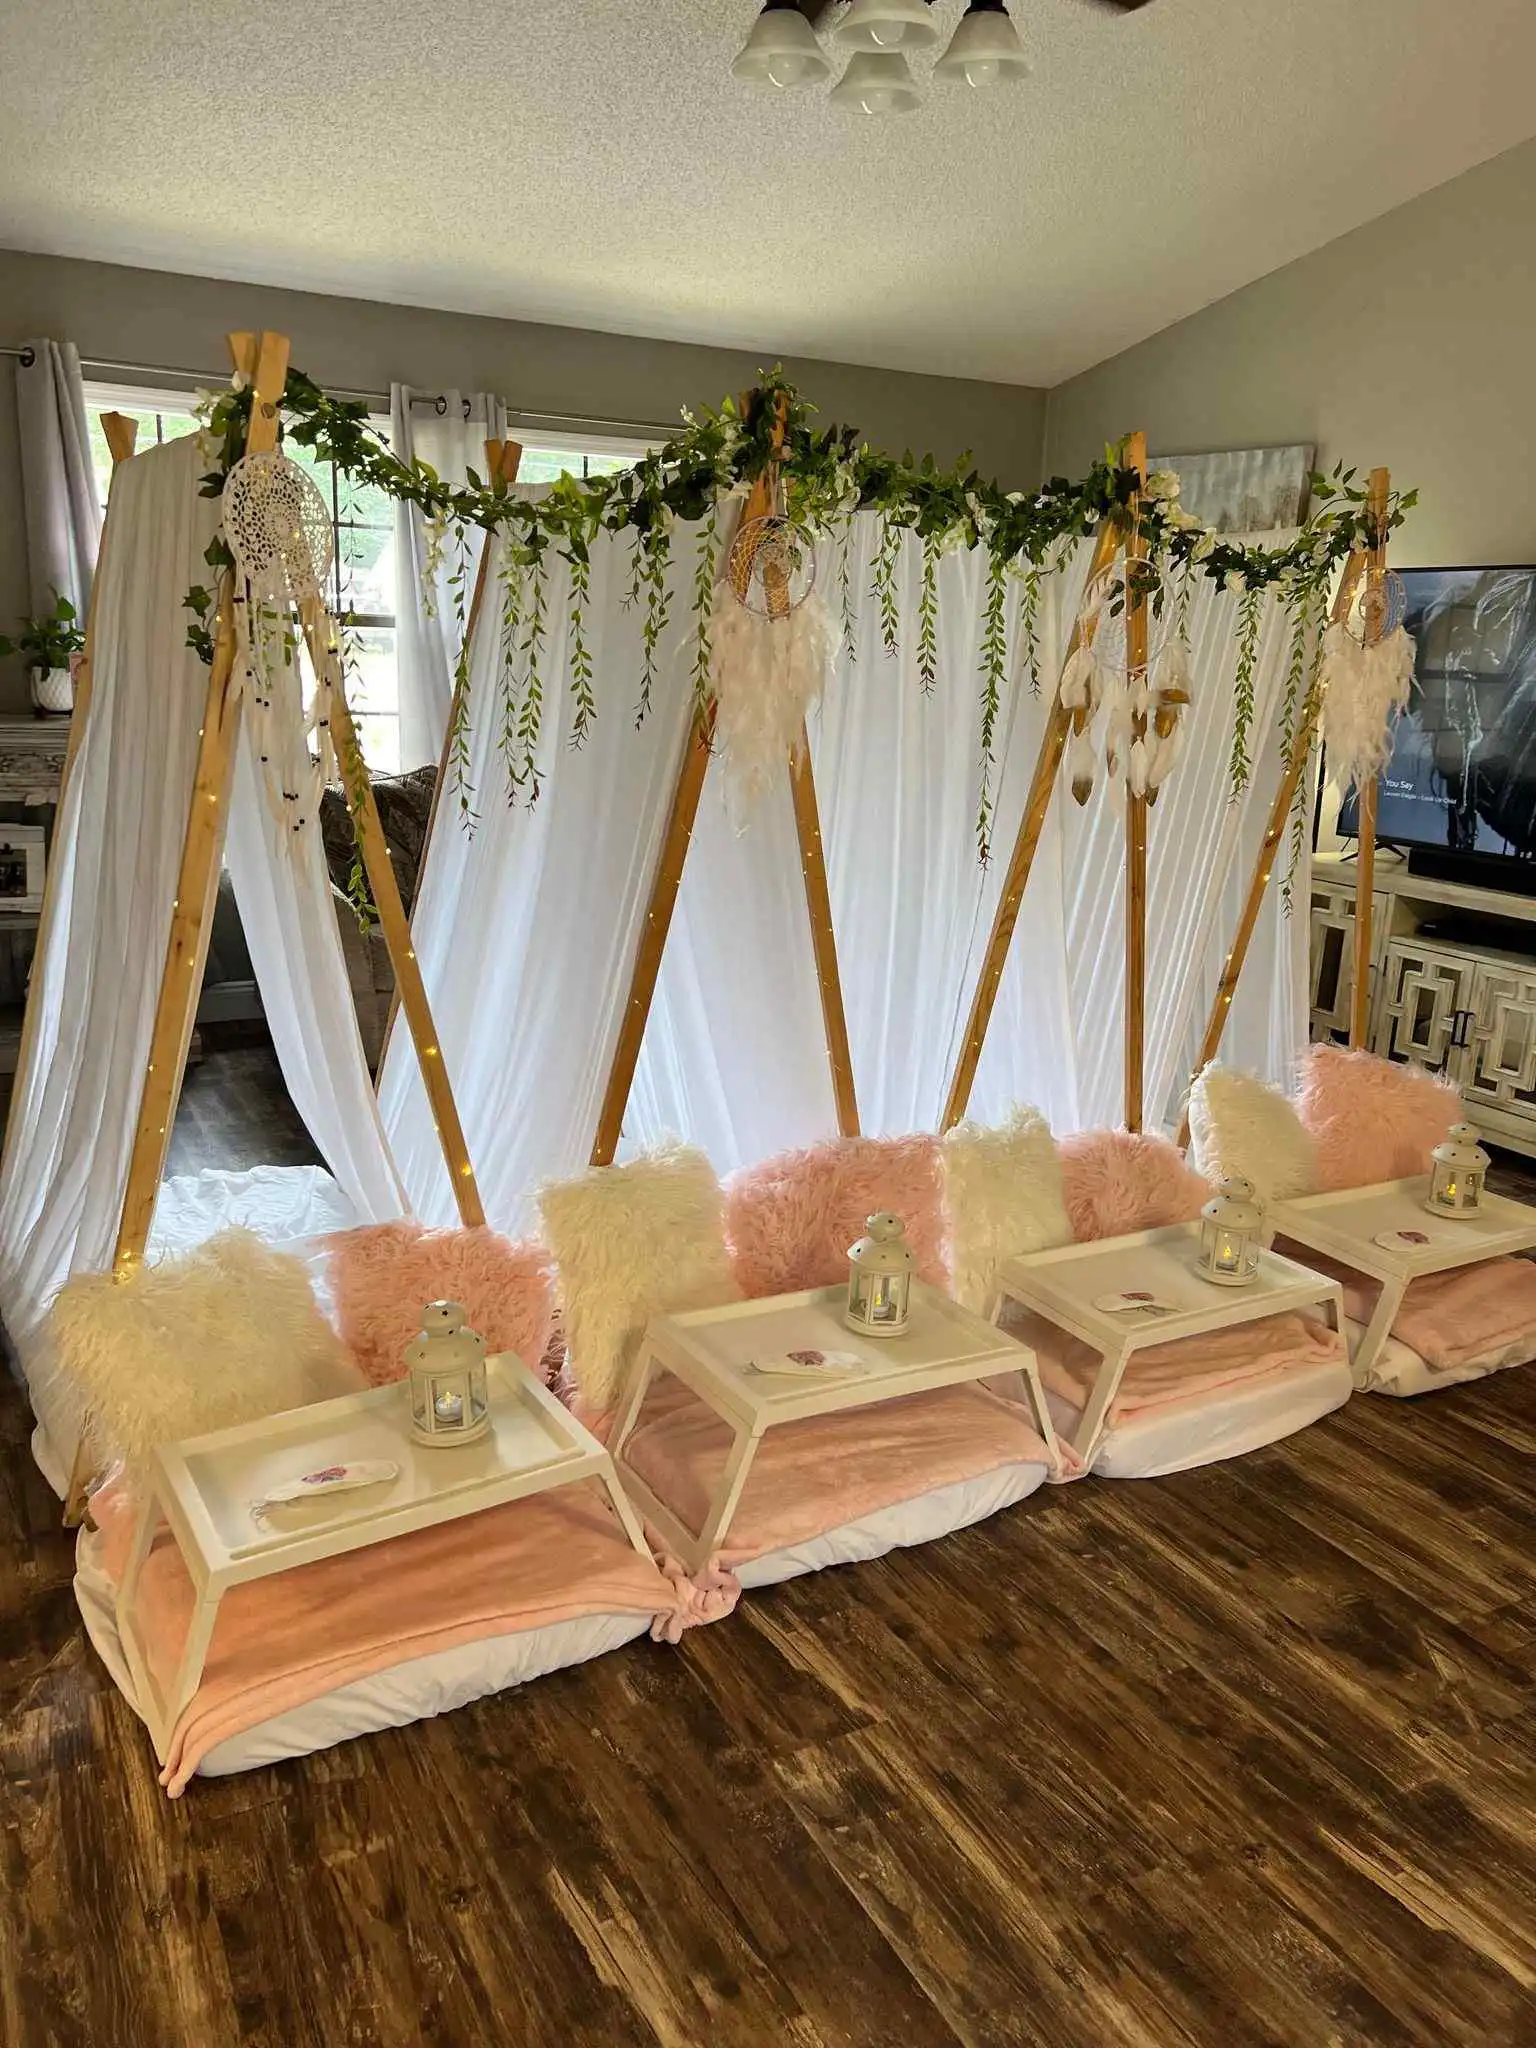 A BeeParty teepee tent set up in a living room.